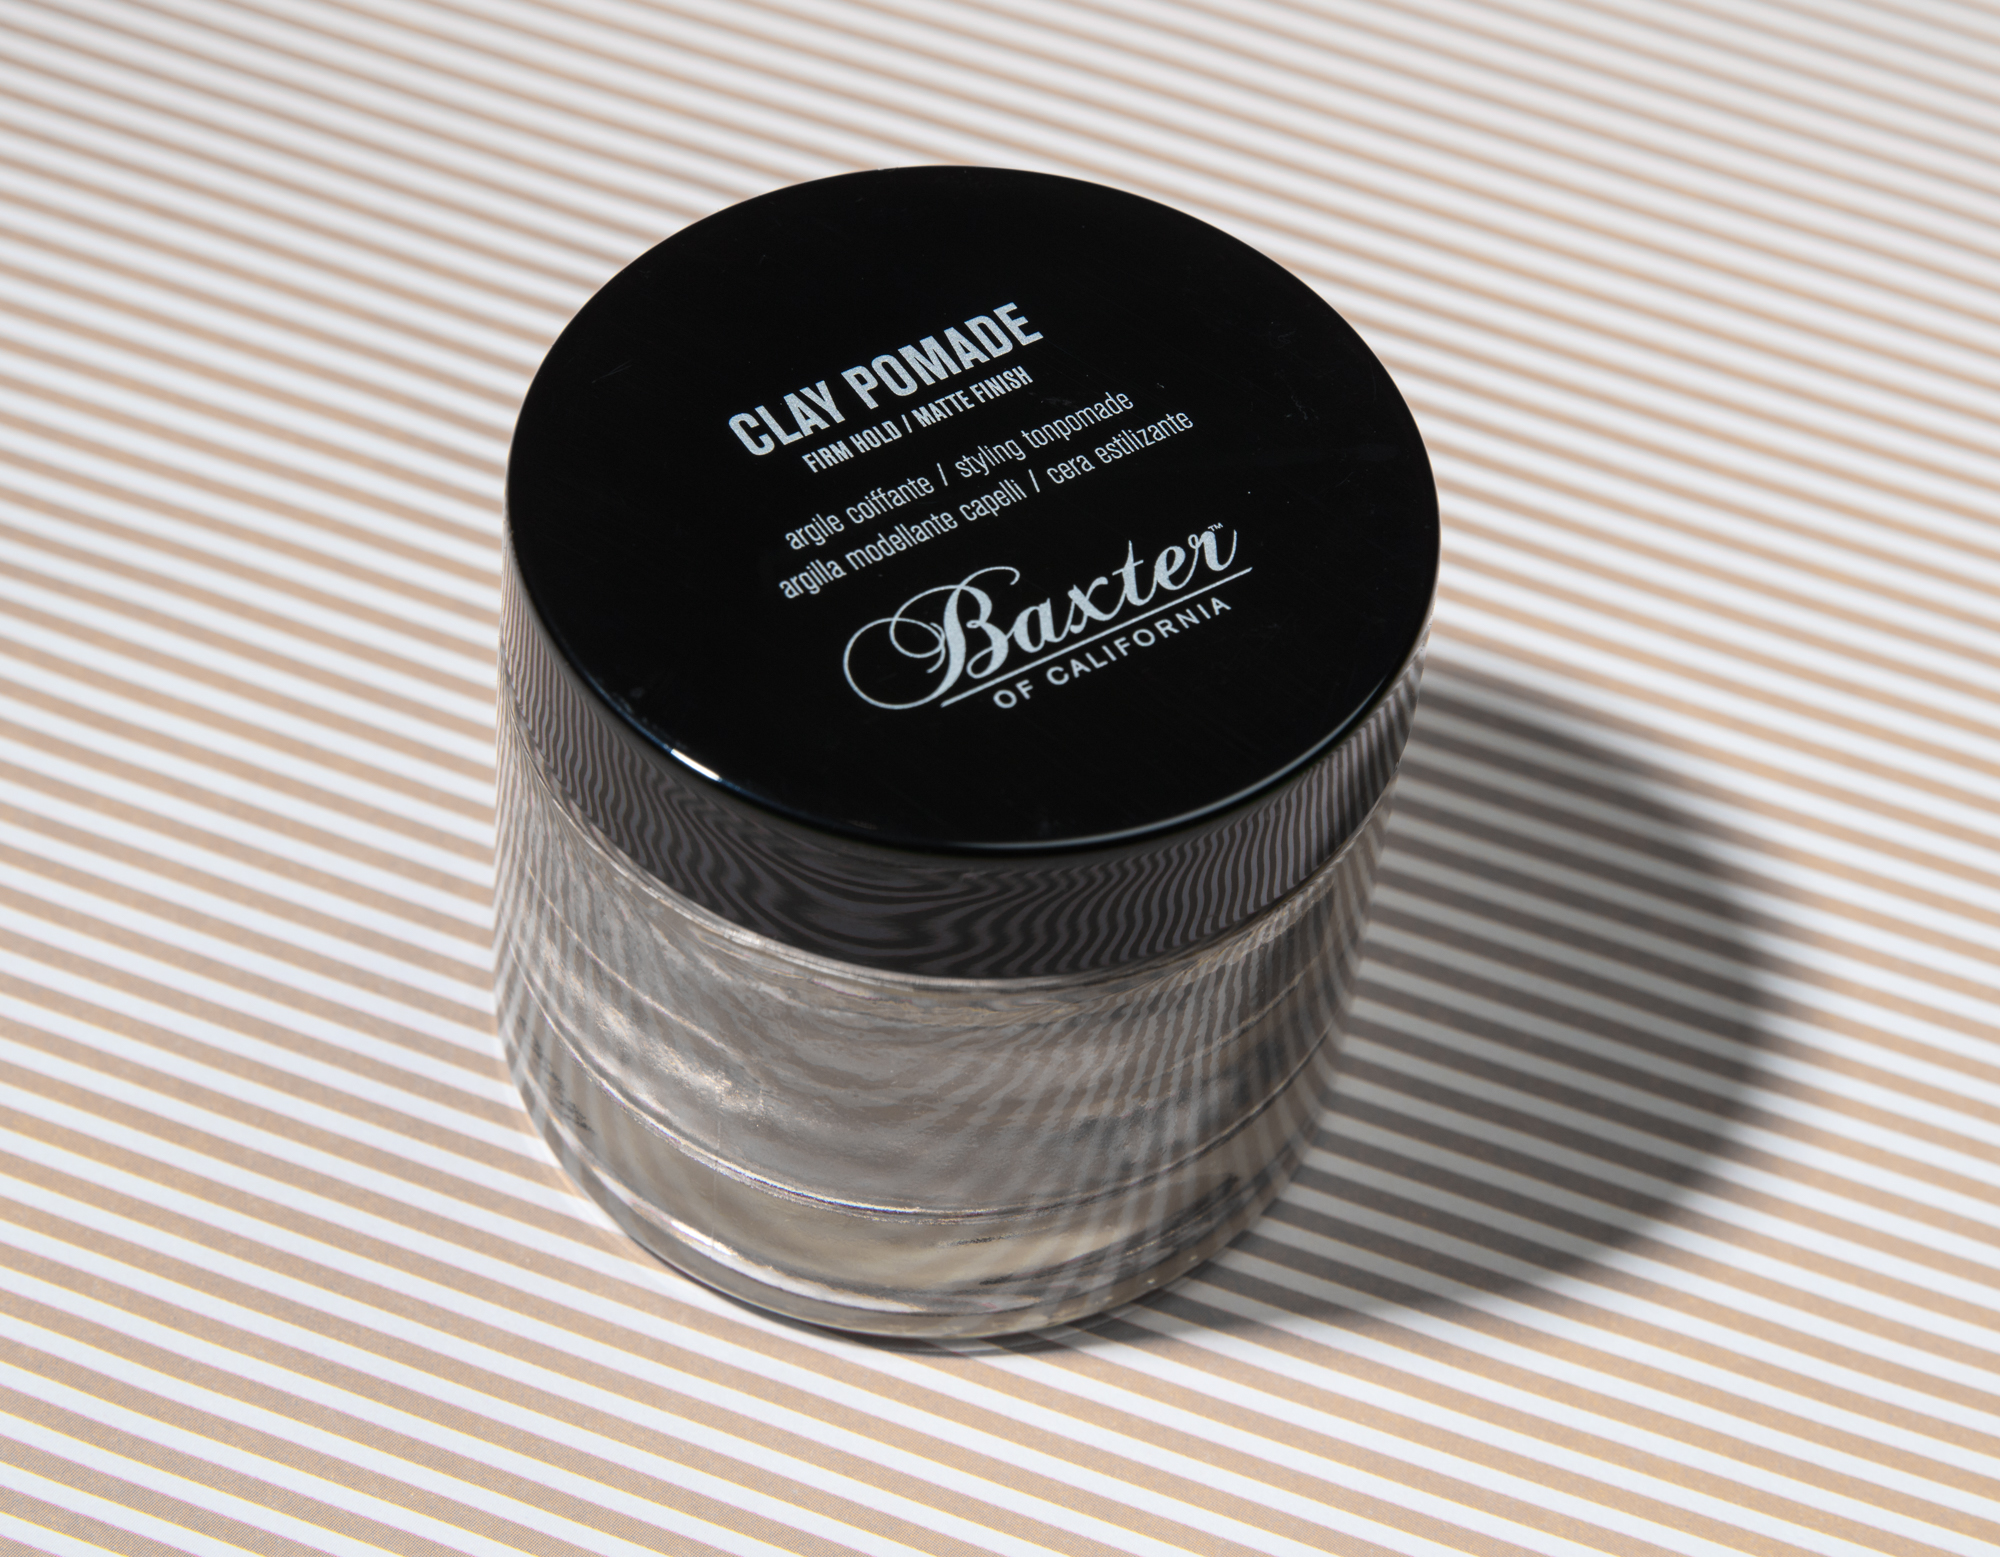 Hair Pomade: From Extreme Styles to Classic Definition